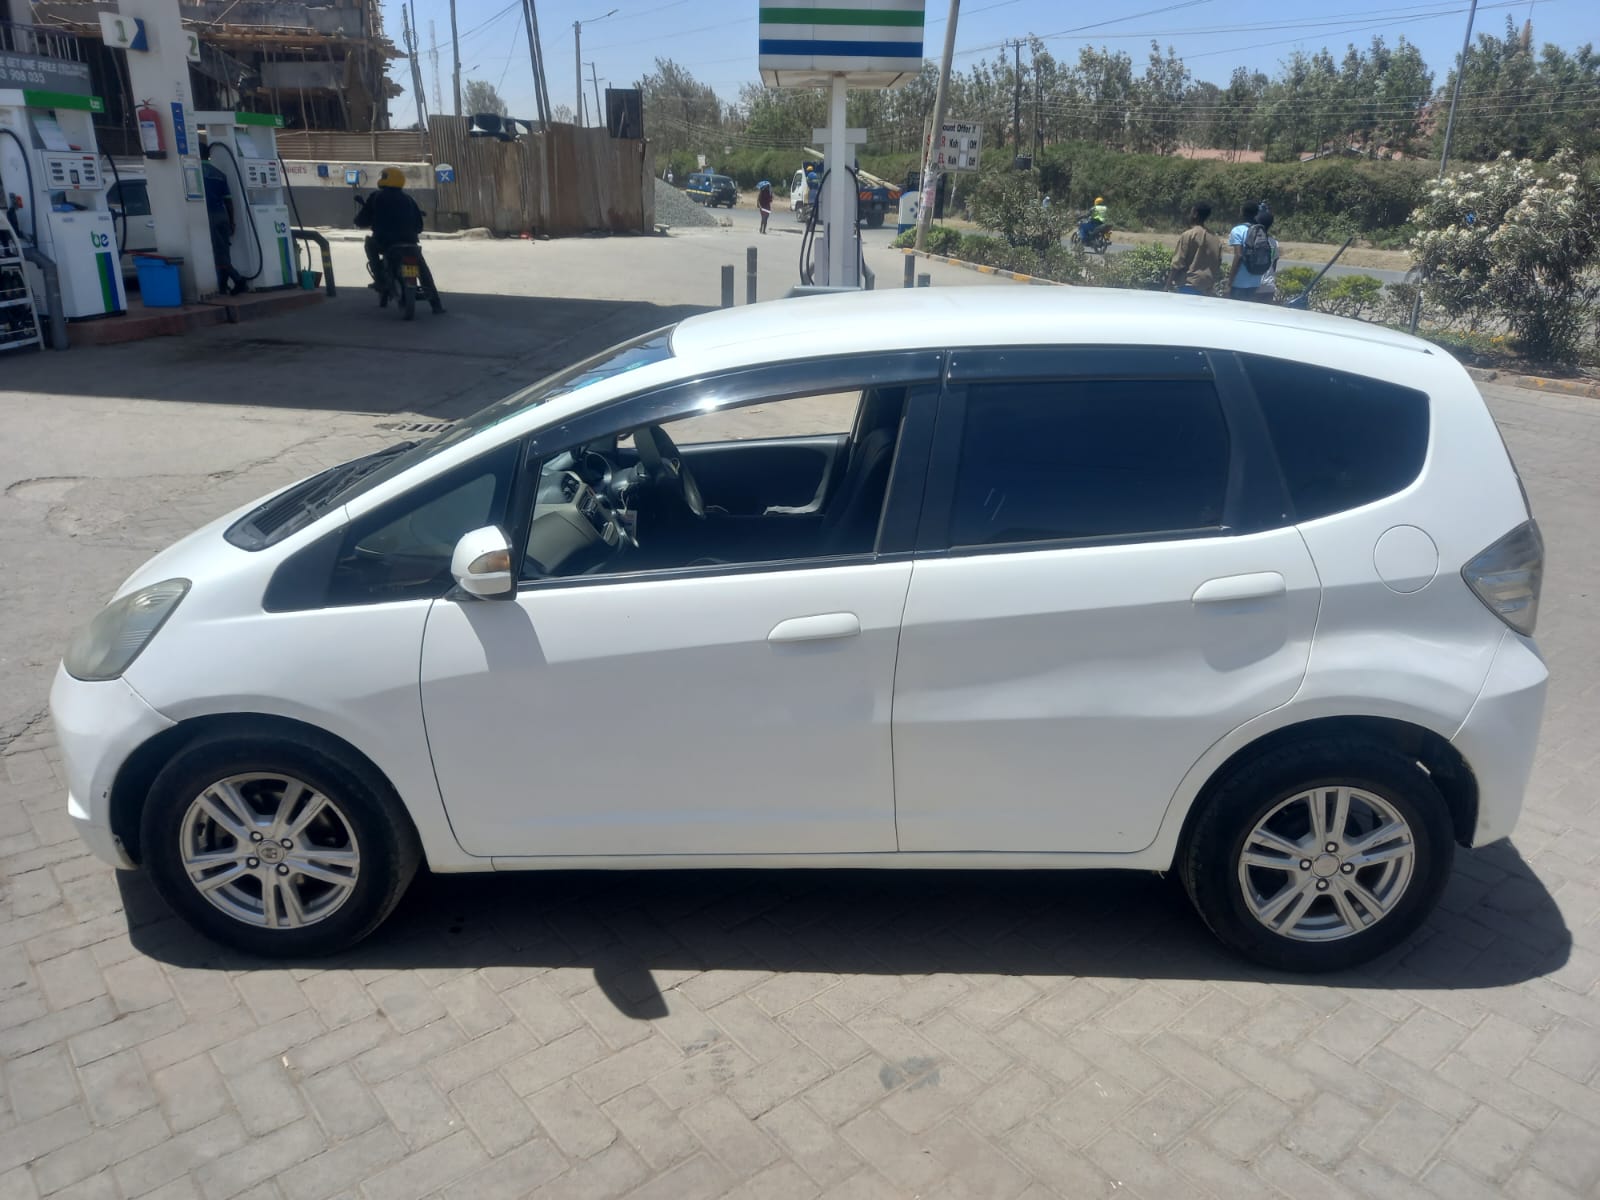 Honda fit 2010 420K ONLY You Pay 30% Deposit Trade in OK Wow